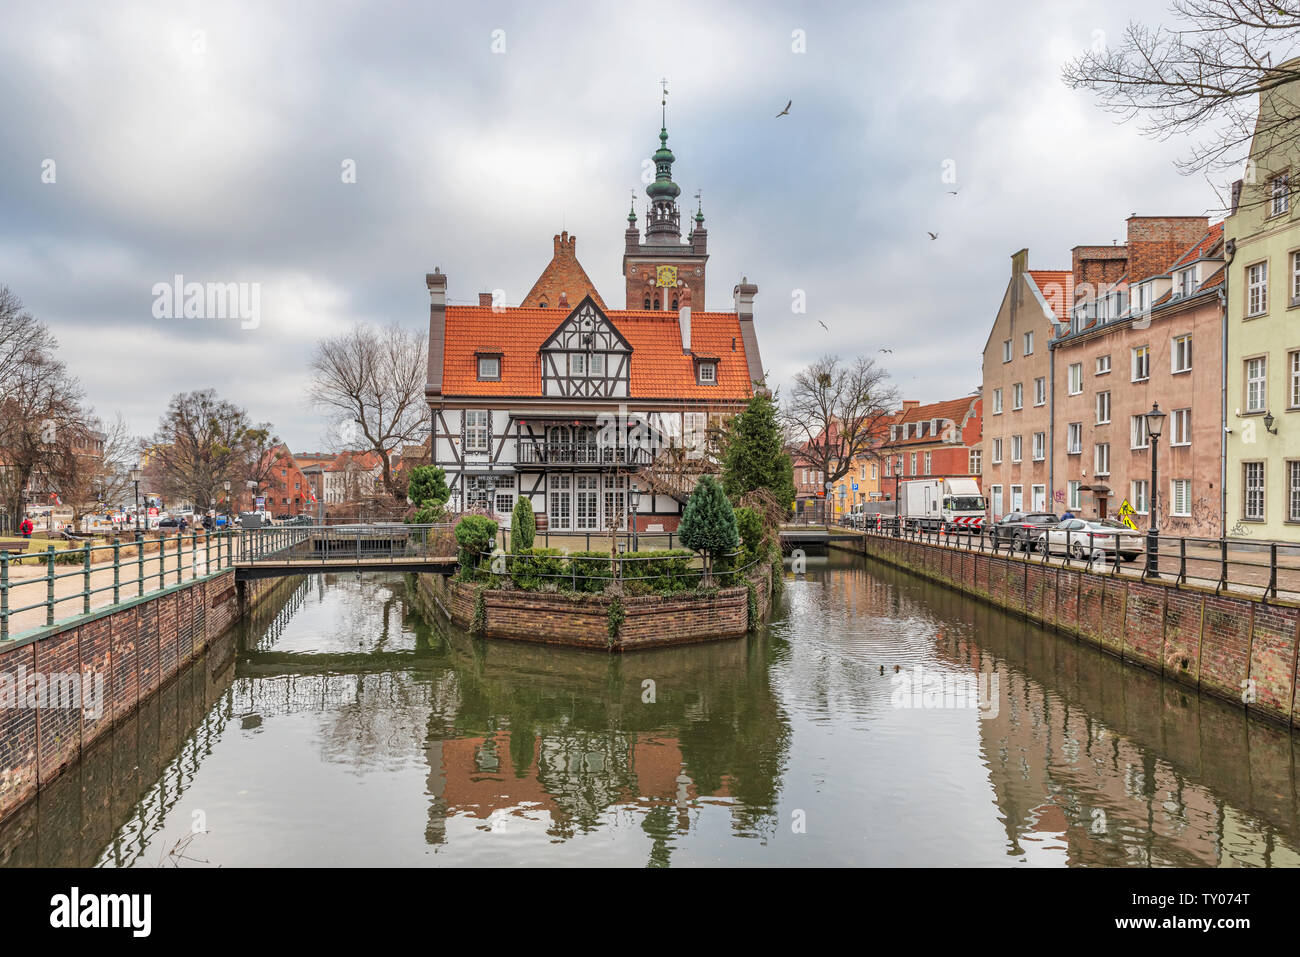 Gdansk, Poland – Feb 14, 2019: View at Miller's House, old headquarters of the Millers guild, Mill Island in Gdansk, Poland. Stock Photo